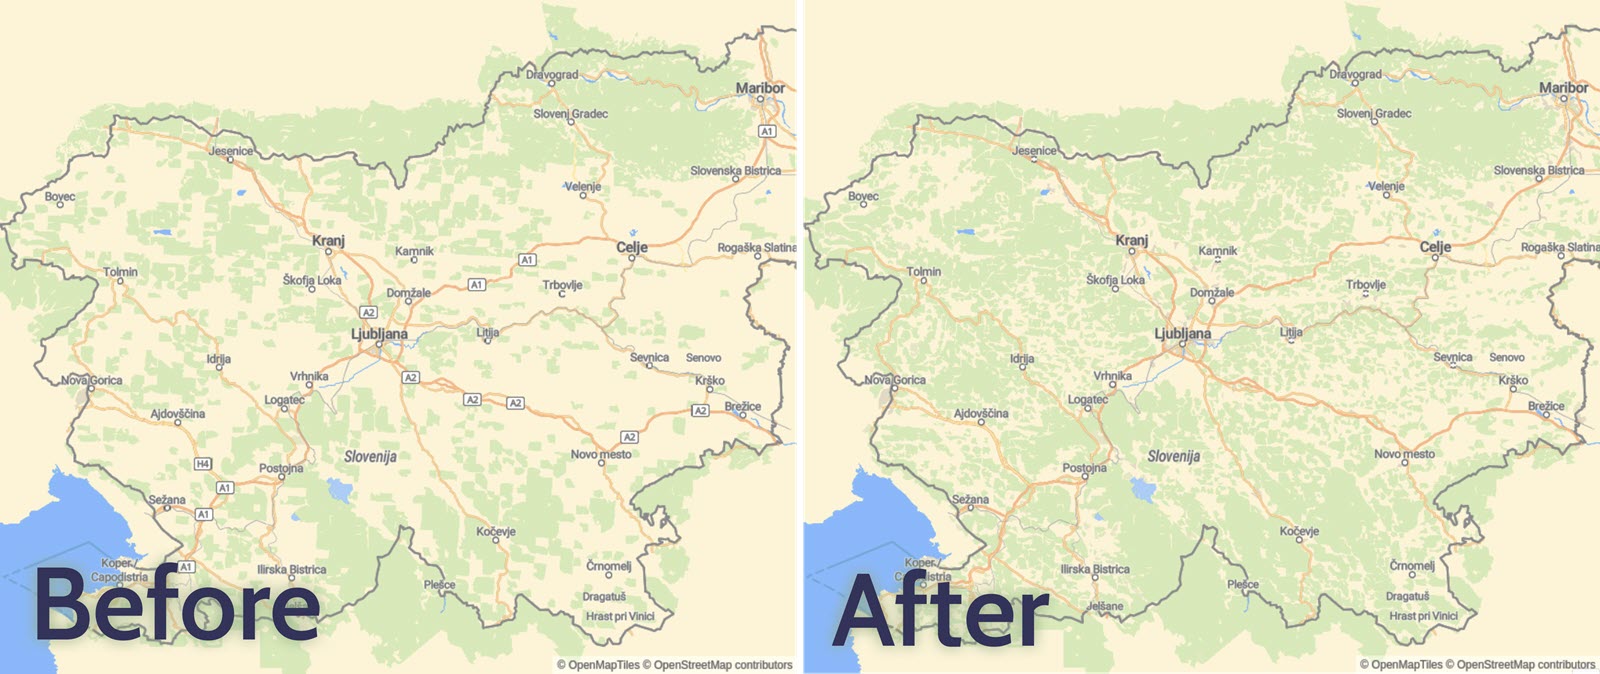 Before and After images of landcover and landuse improvements